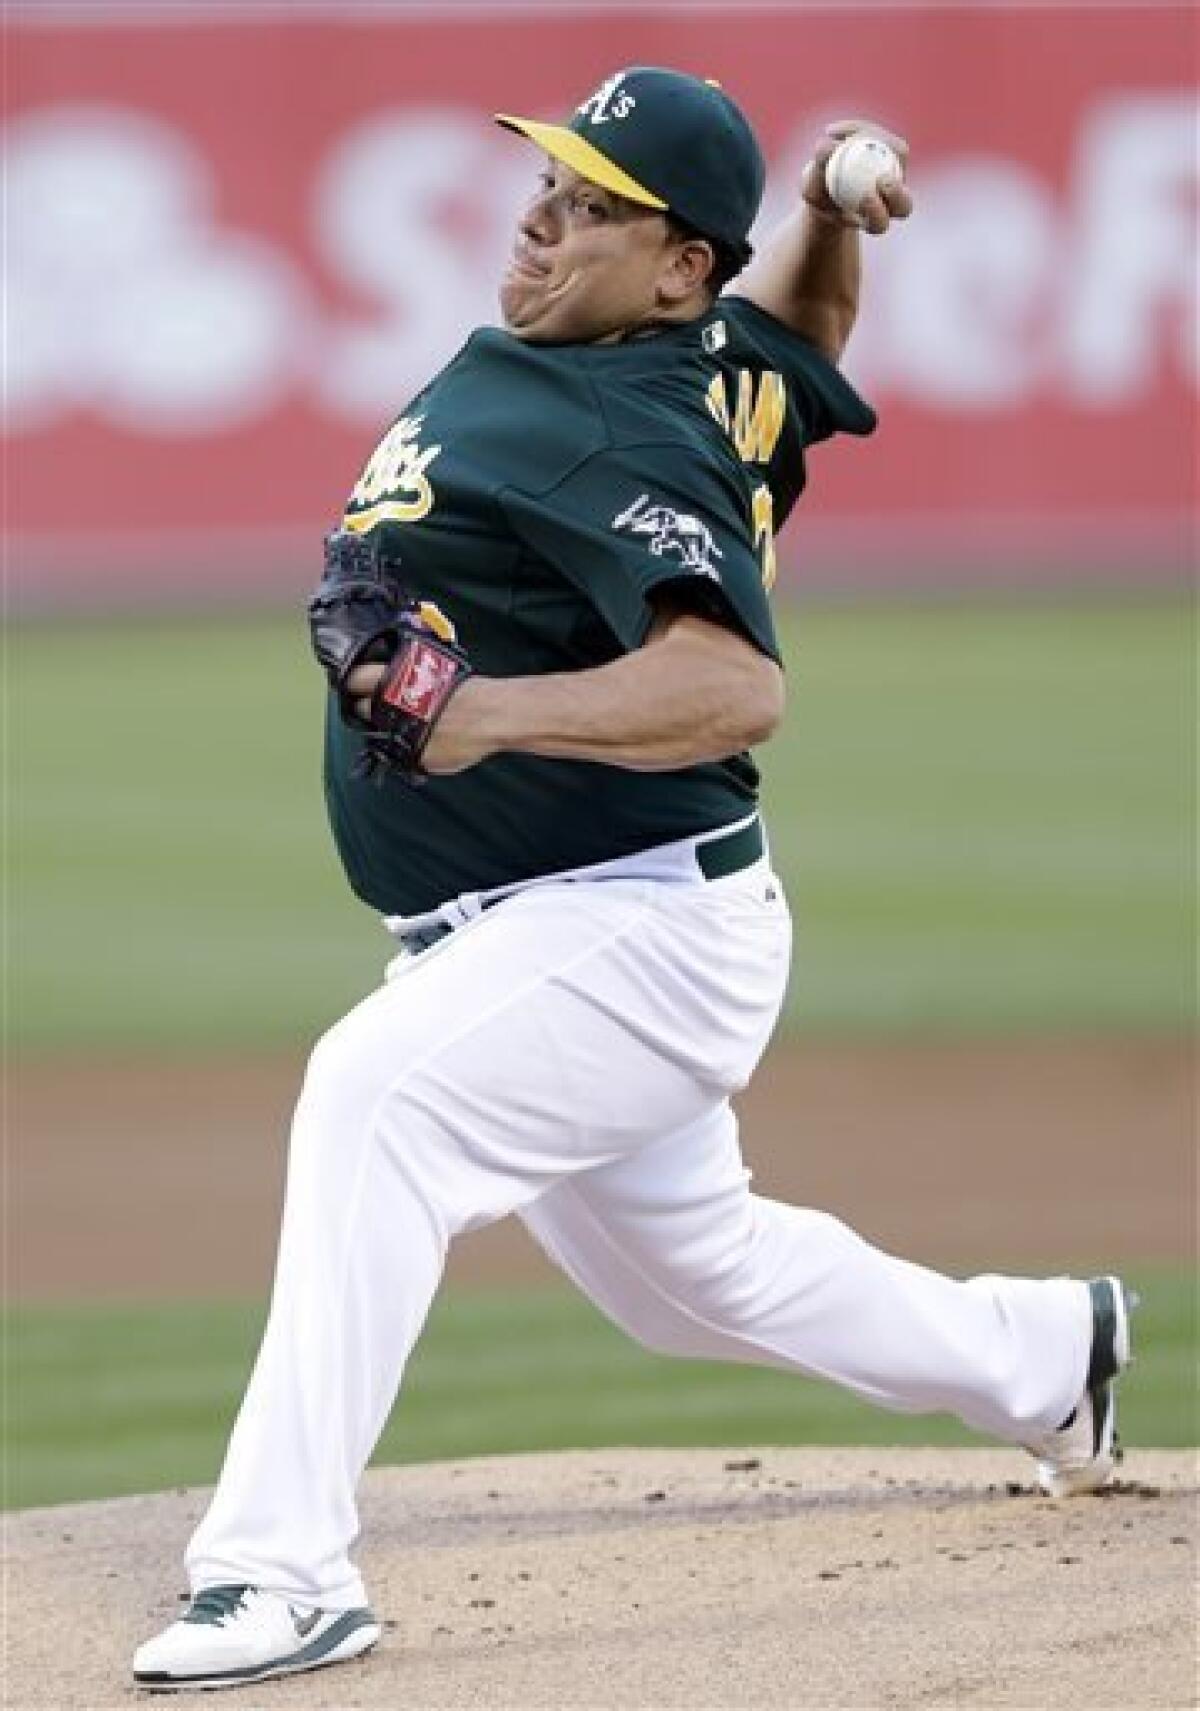 Colon's 5-hitter leads A's past White Sox 3-0 - The San Diego